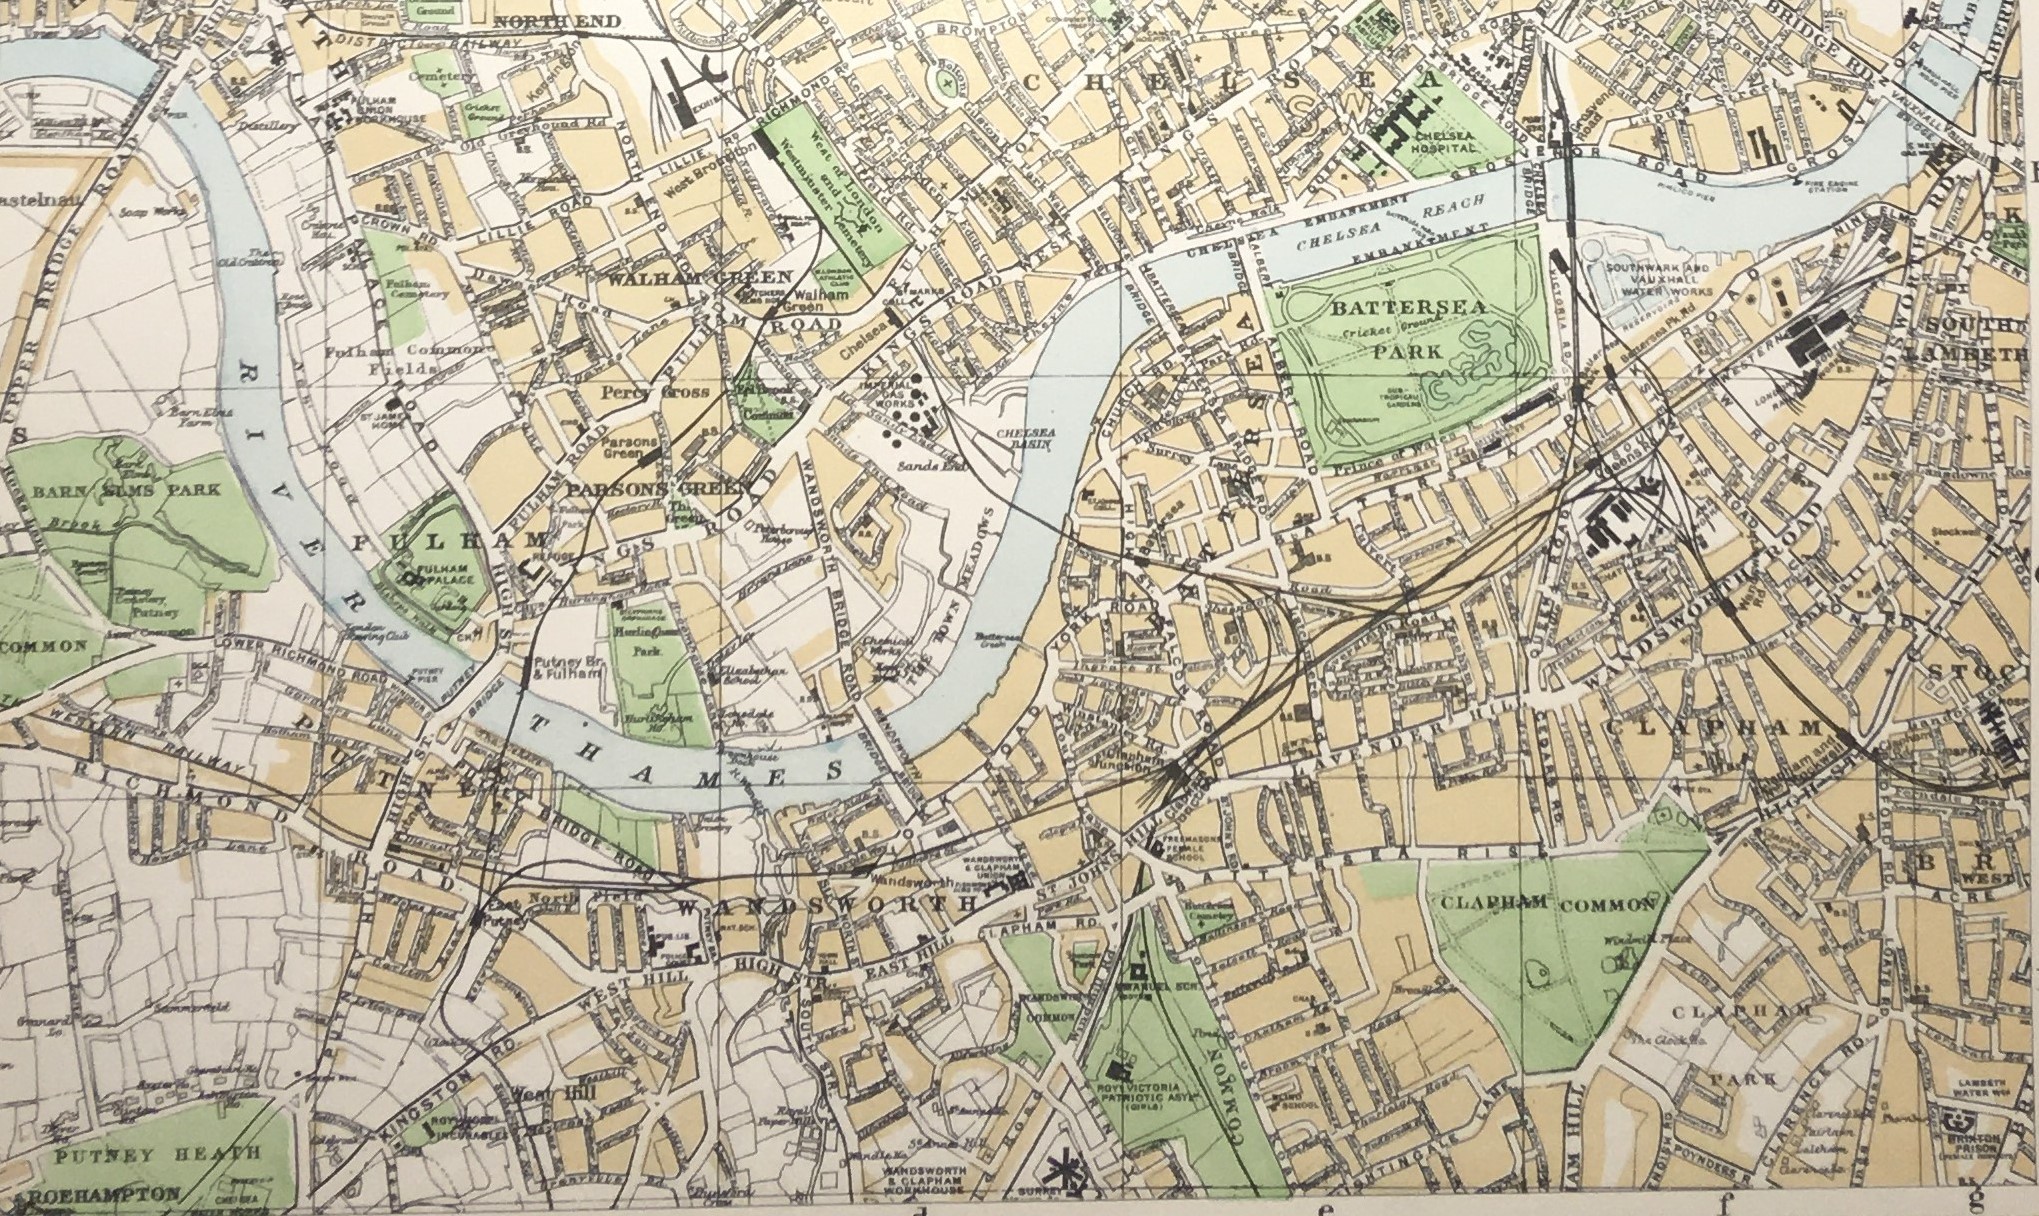 The West End Of London Victorian Street Areas Map GW Bacon 1899. - Image 2 of 5